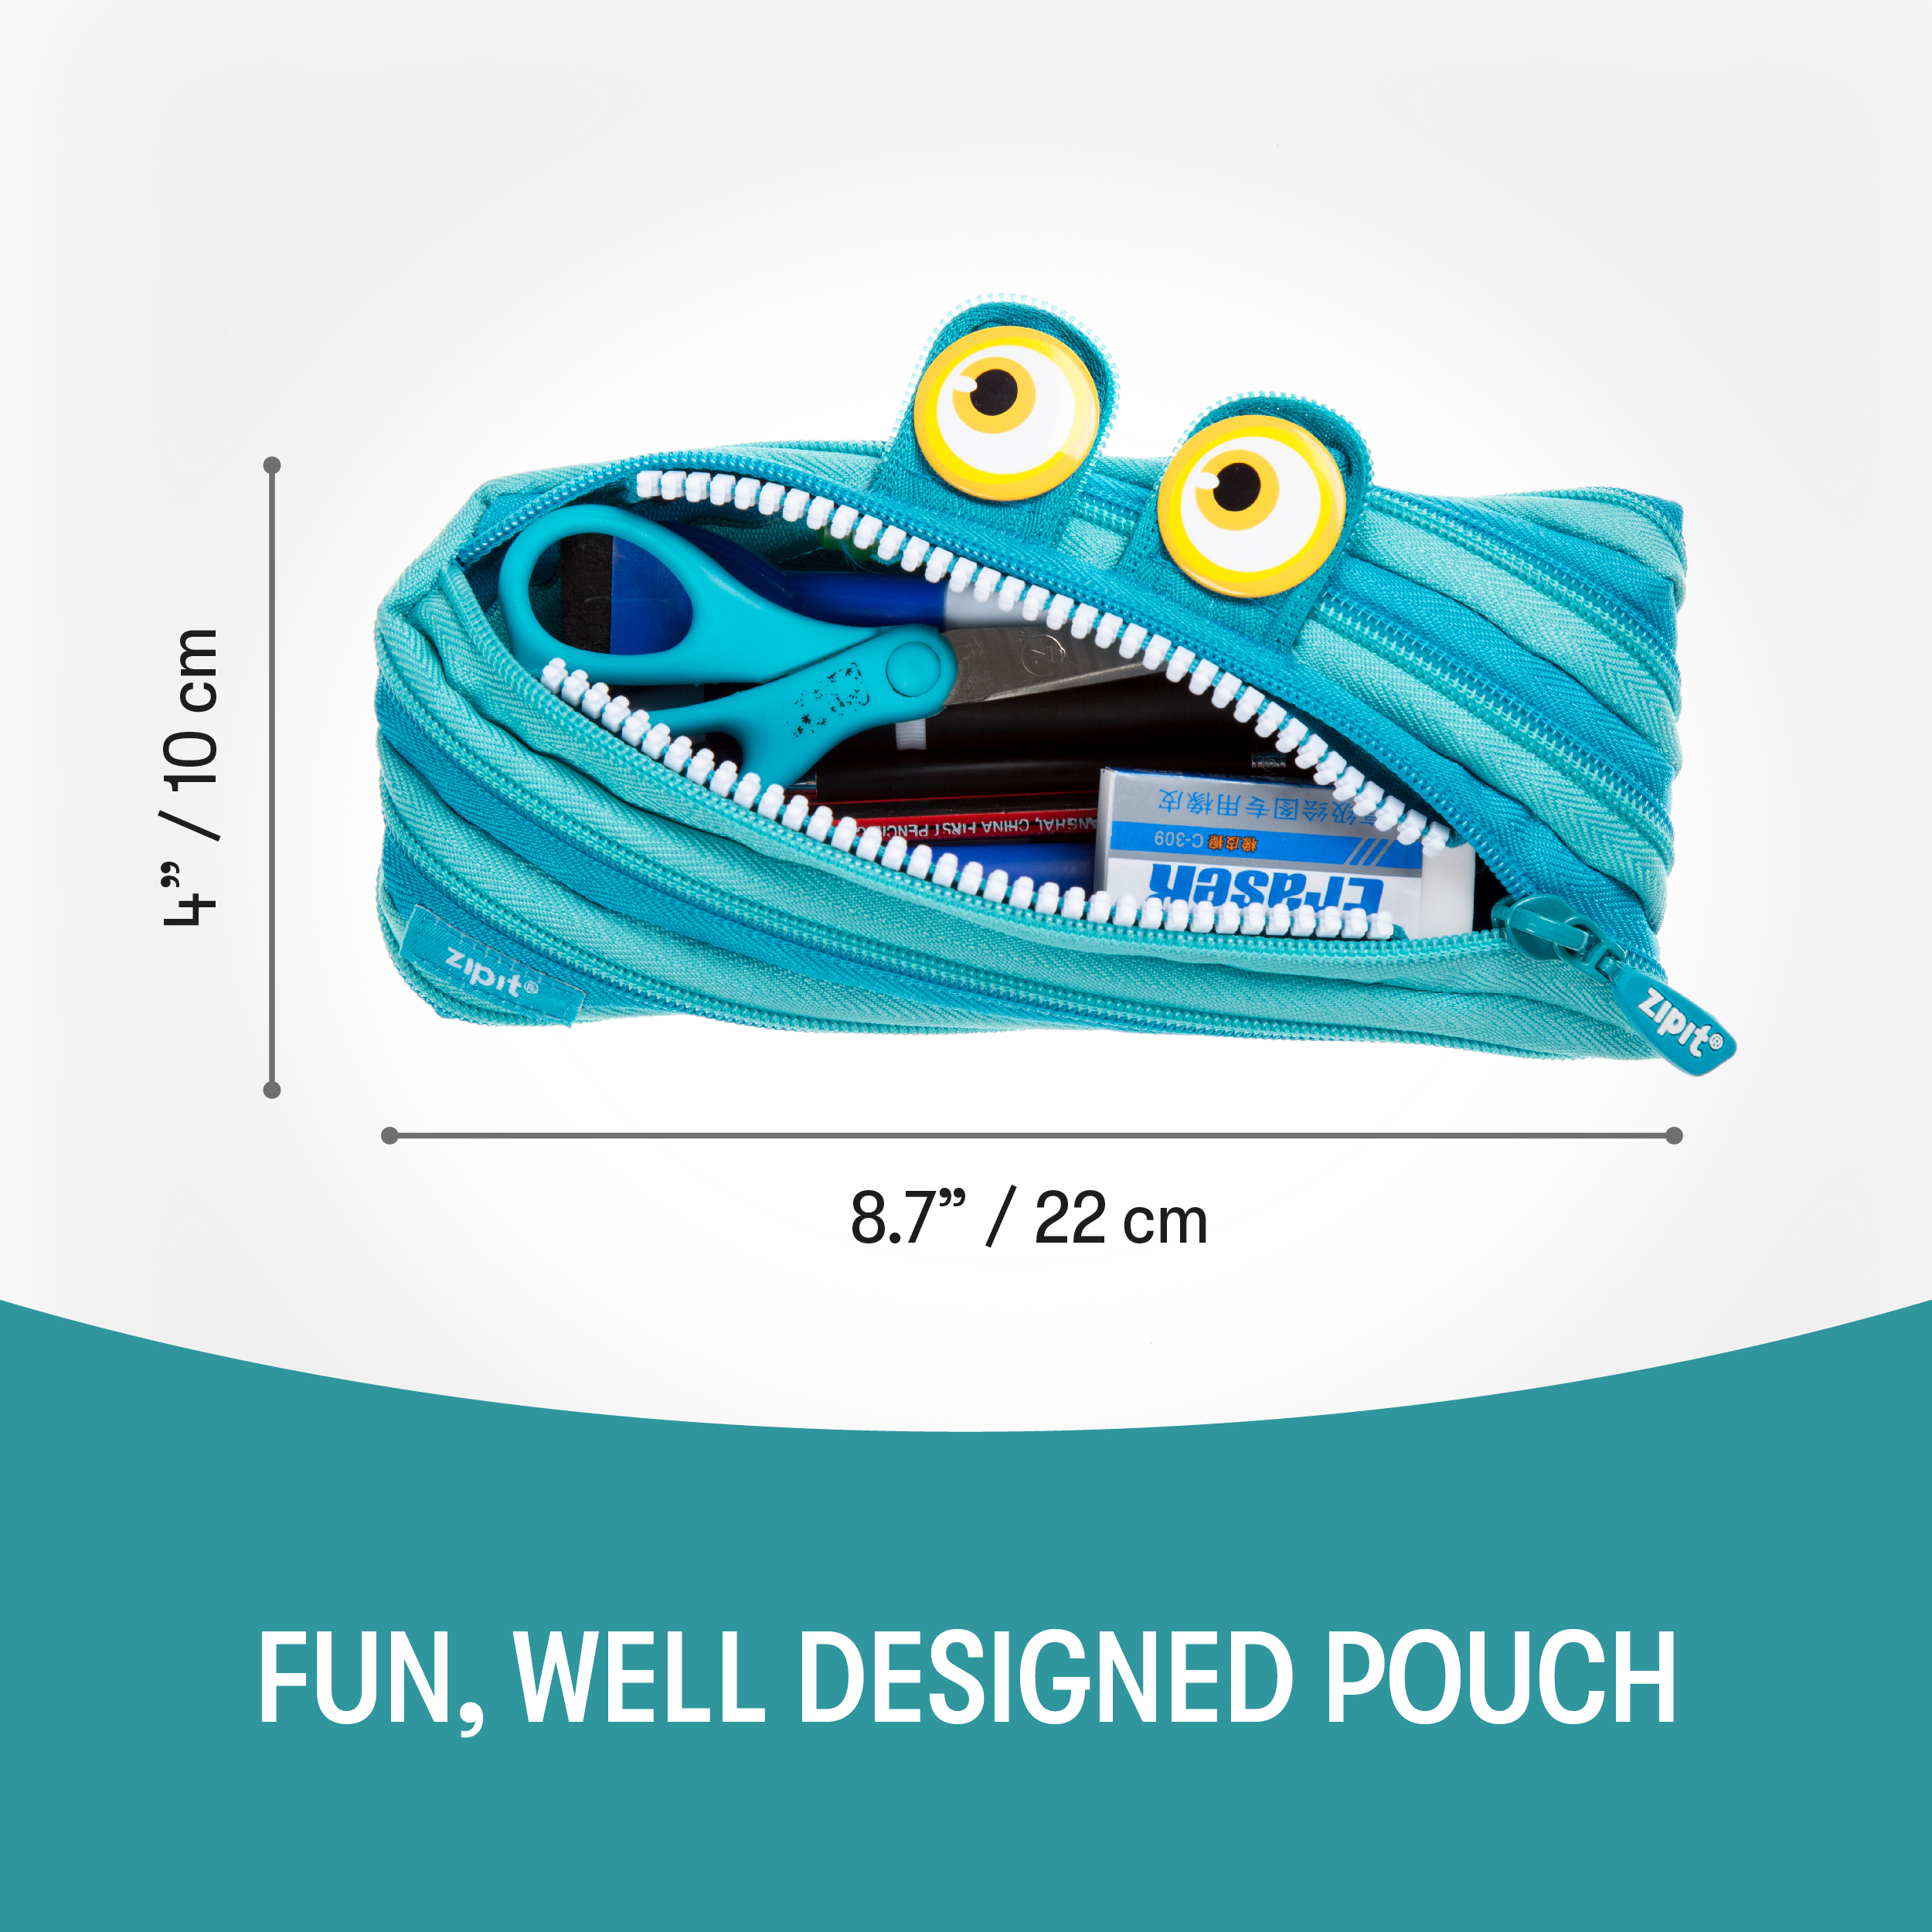 ZIPIT Wildlings Pencil Case for Kids, Holds up to 30 Pens (Blue) - image 3 of 9